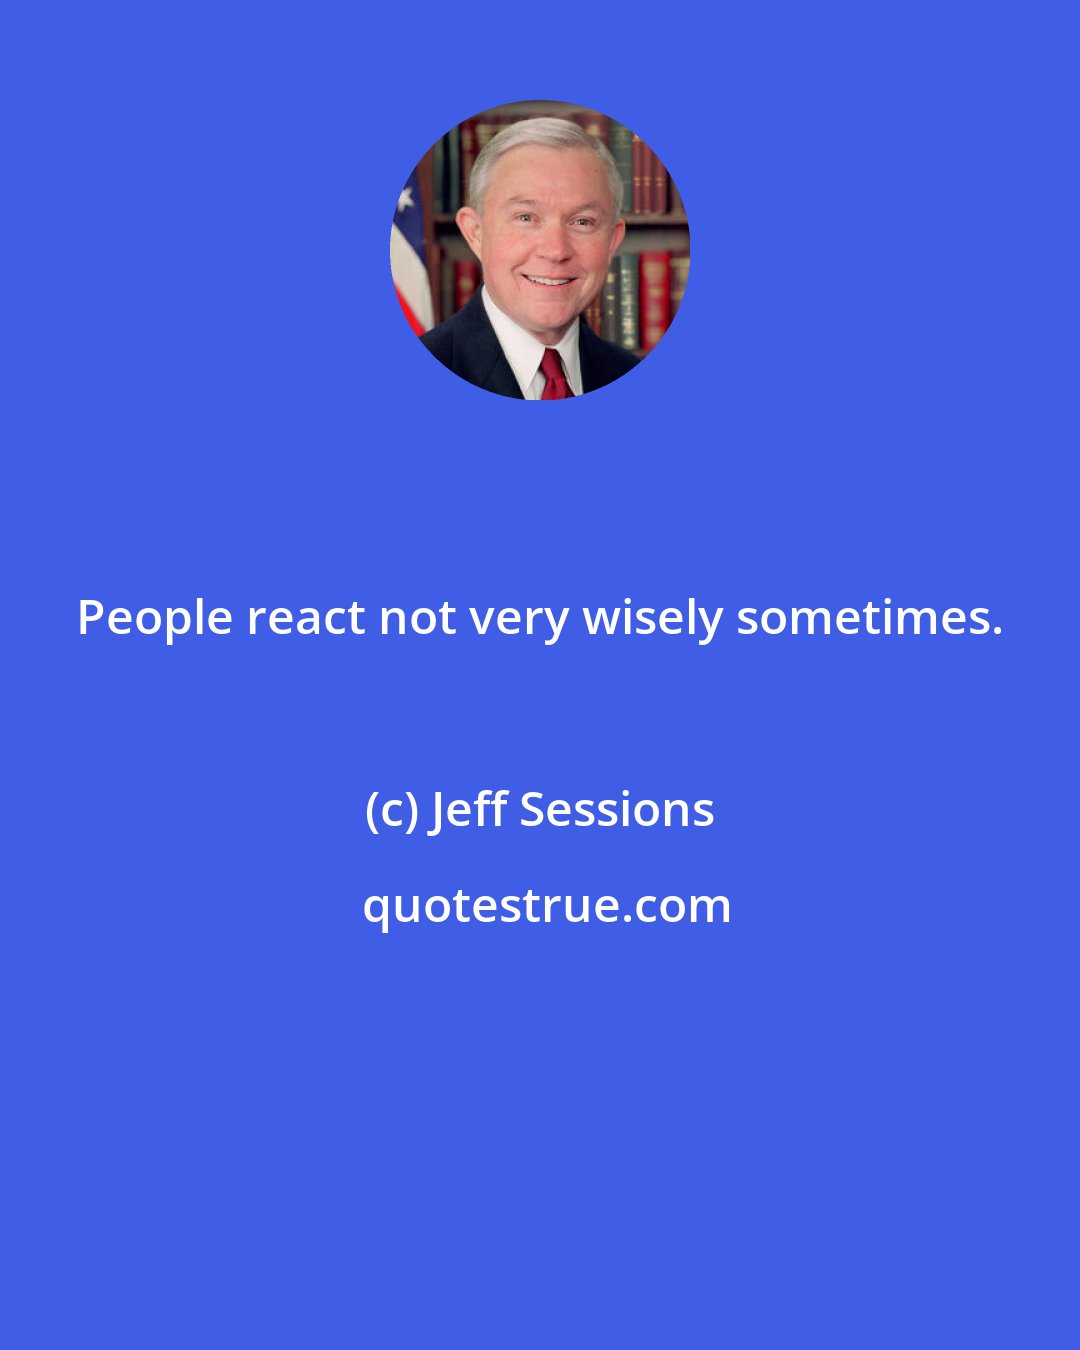 Jeff Sessions: People react not very wisely sometimes.